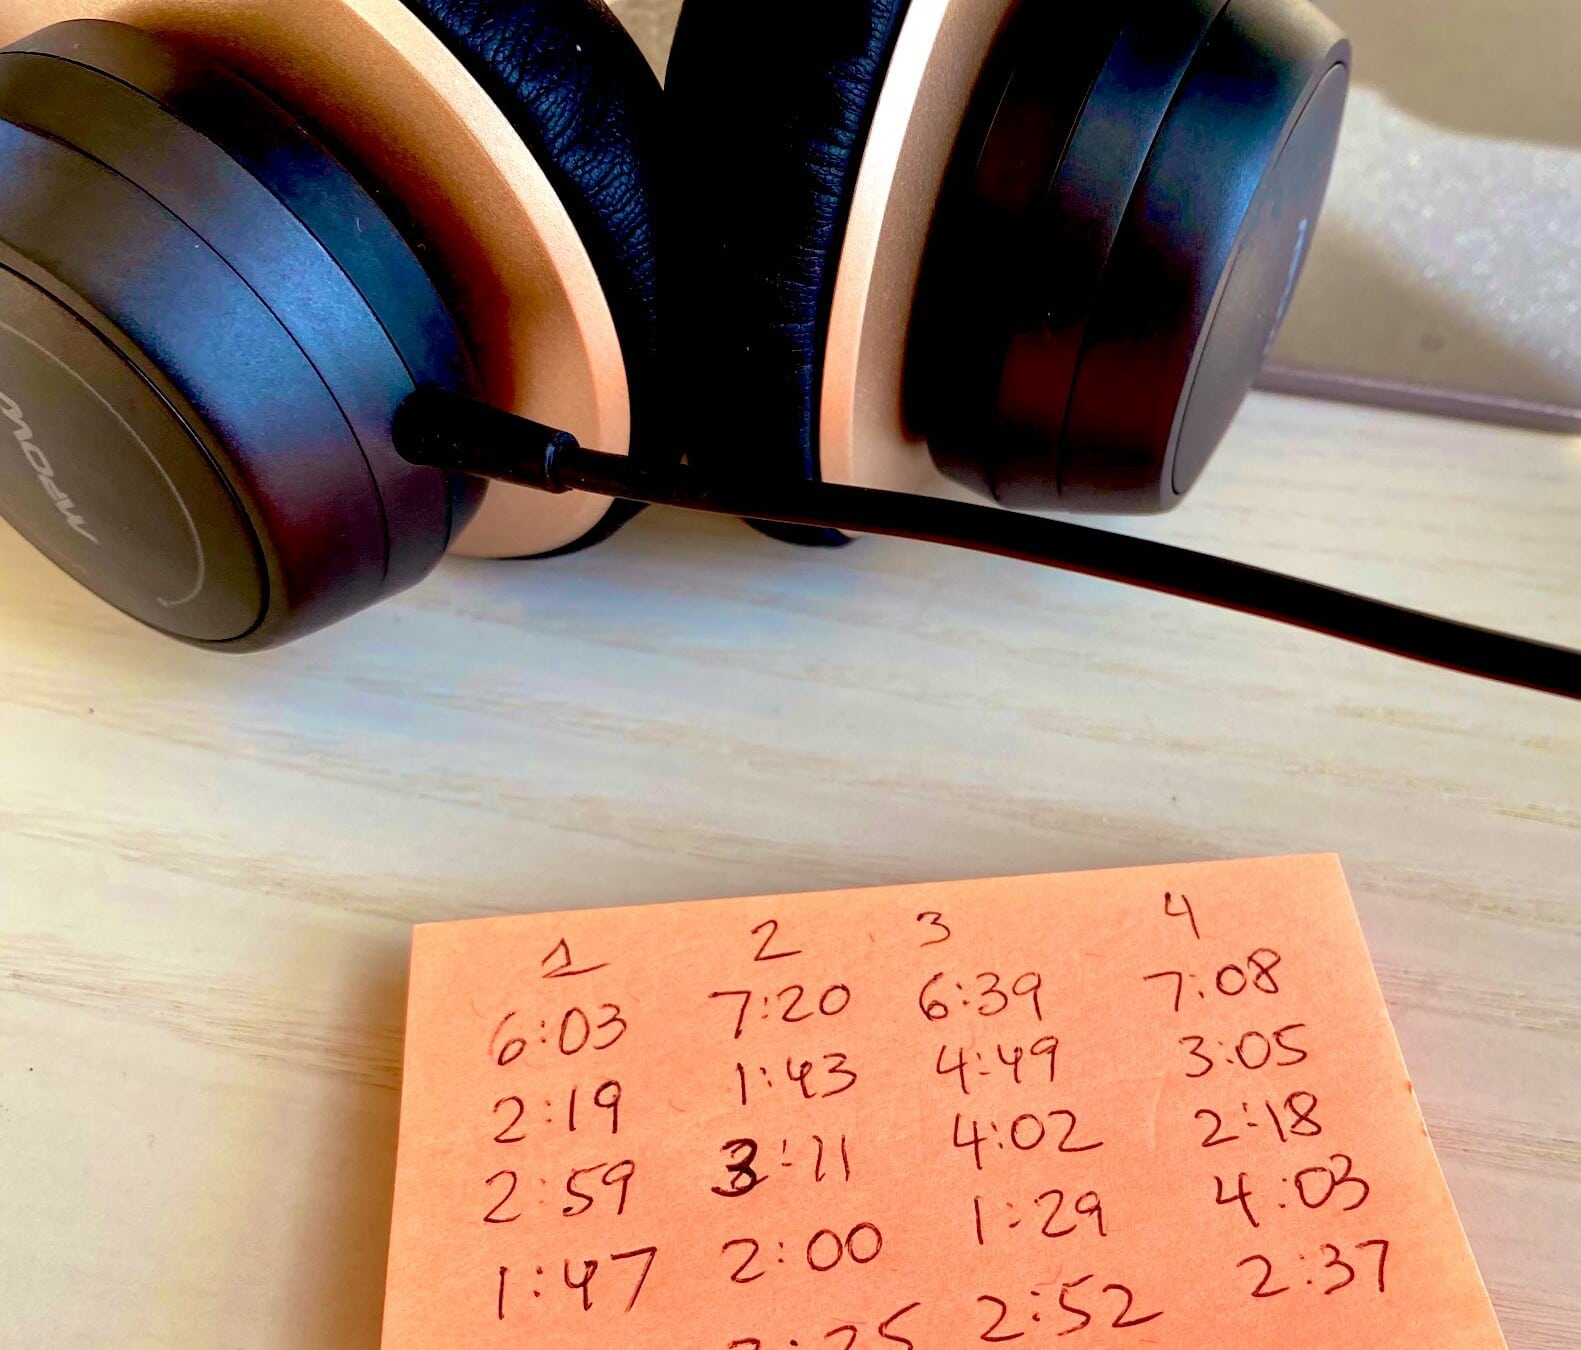 headphones above post-it note with track timings from the Bach Orchestral Suites